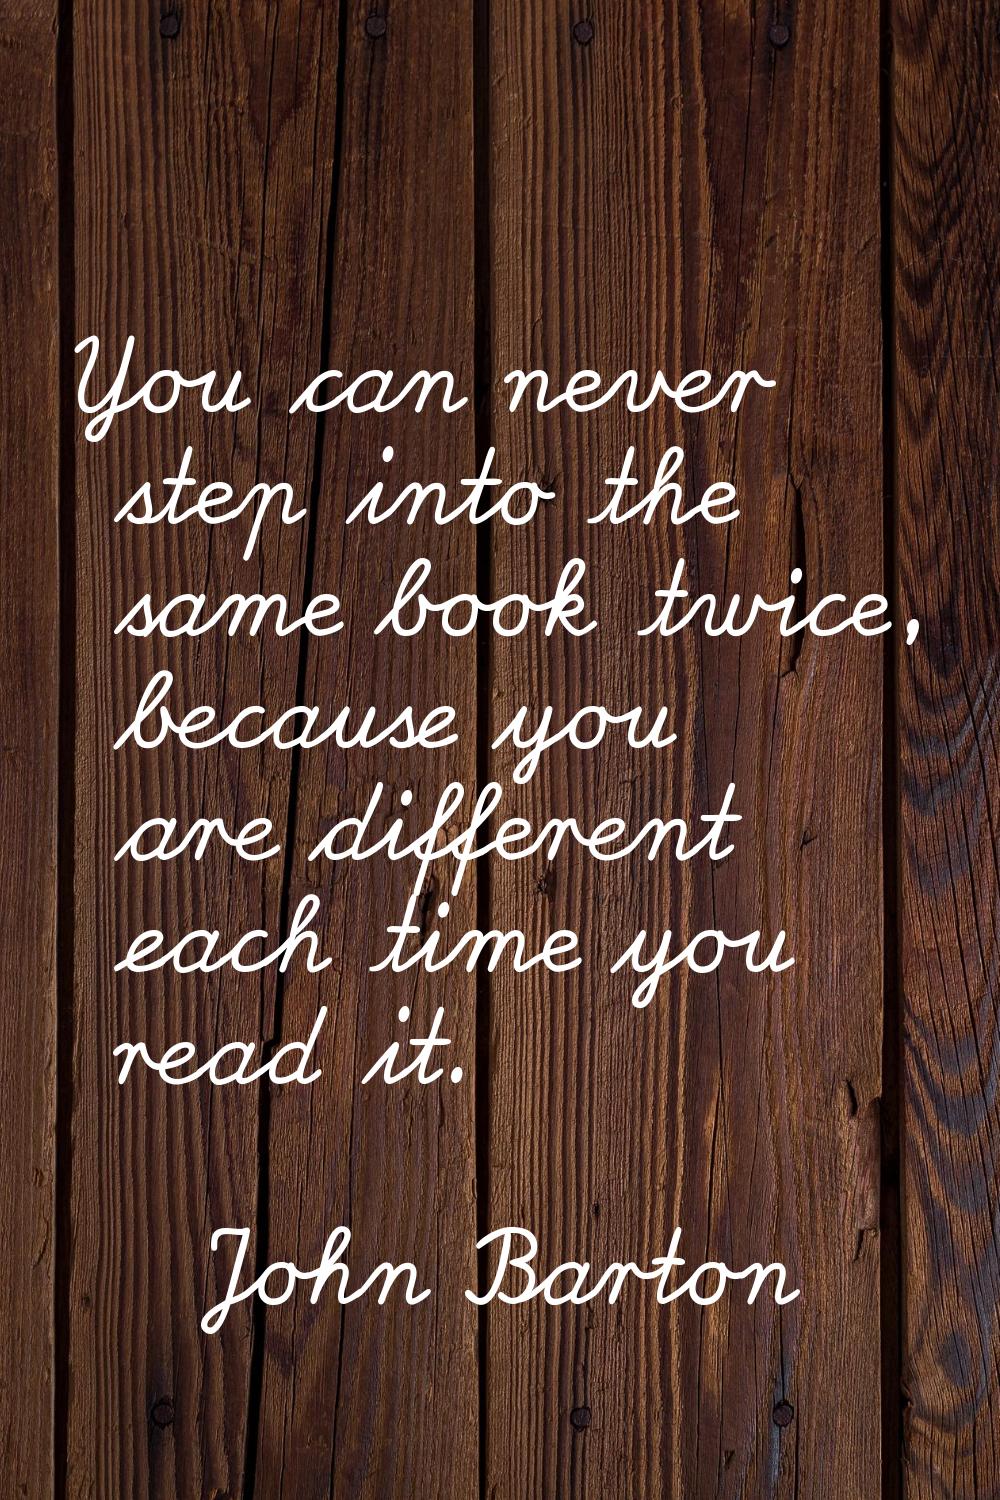 You can never step into the same book twice, because you are different each time you read it.